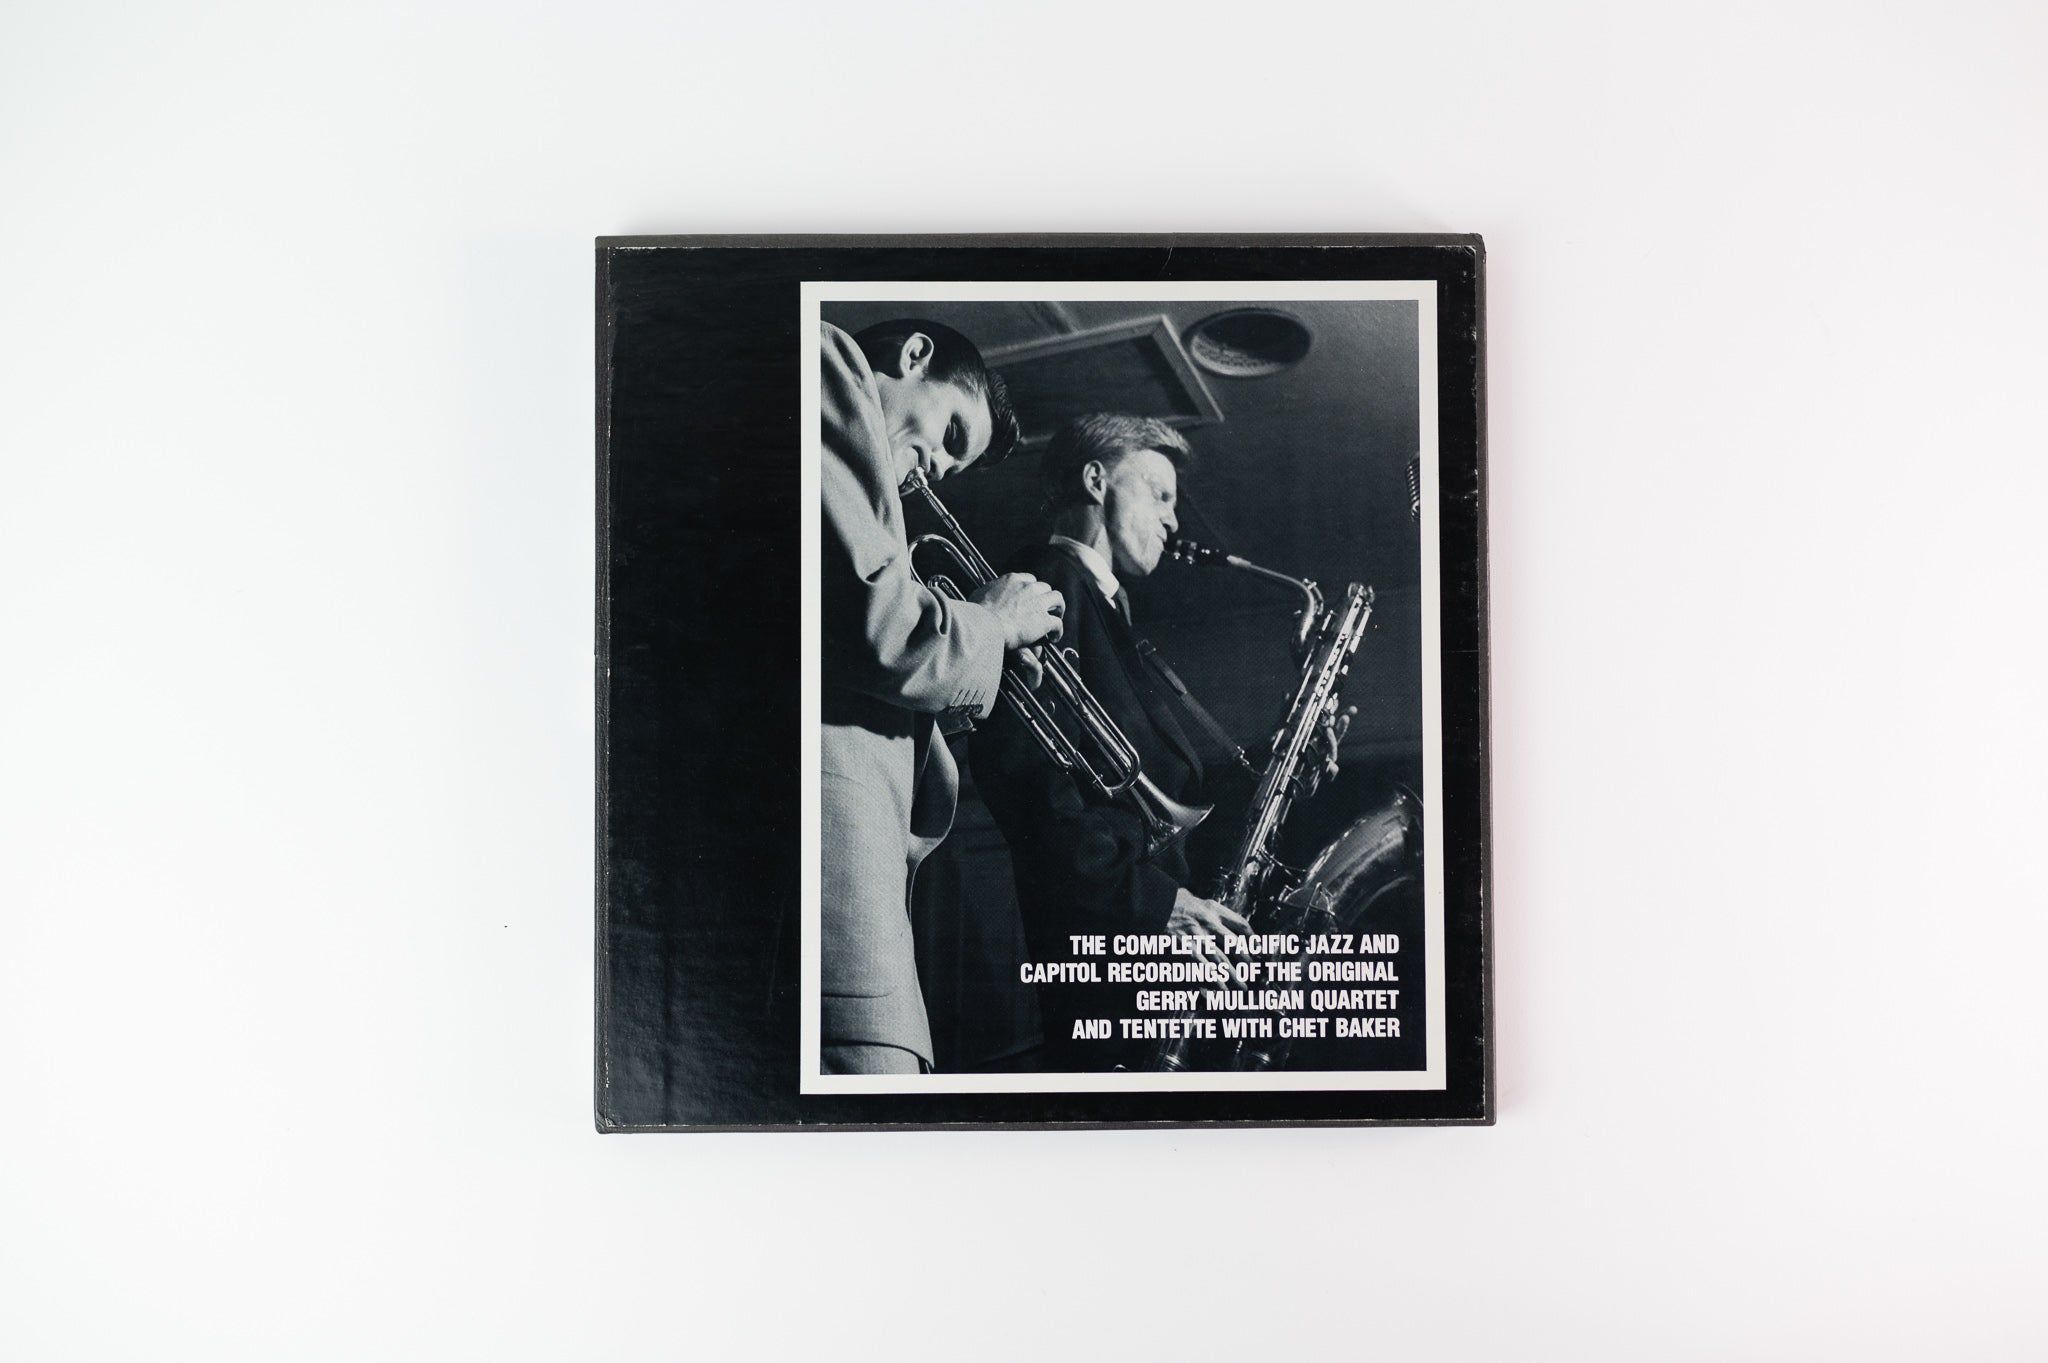 Gerry Mulligan Quartet - The Complete Pacific Jazz And Capitol Recordings Of The Original Gerry Mulligan Quartet And Tentette With Chet Baker on Mosaic - 5-lp Box Set